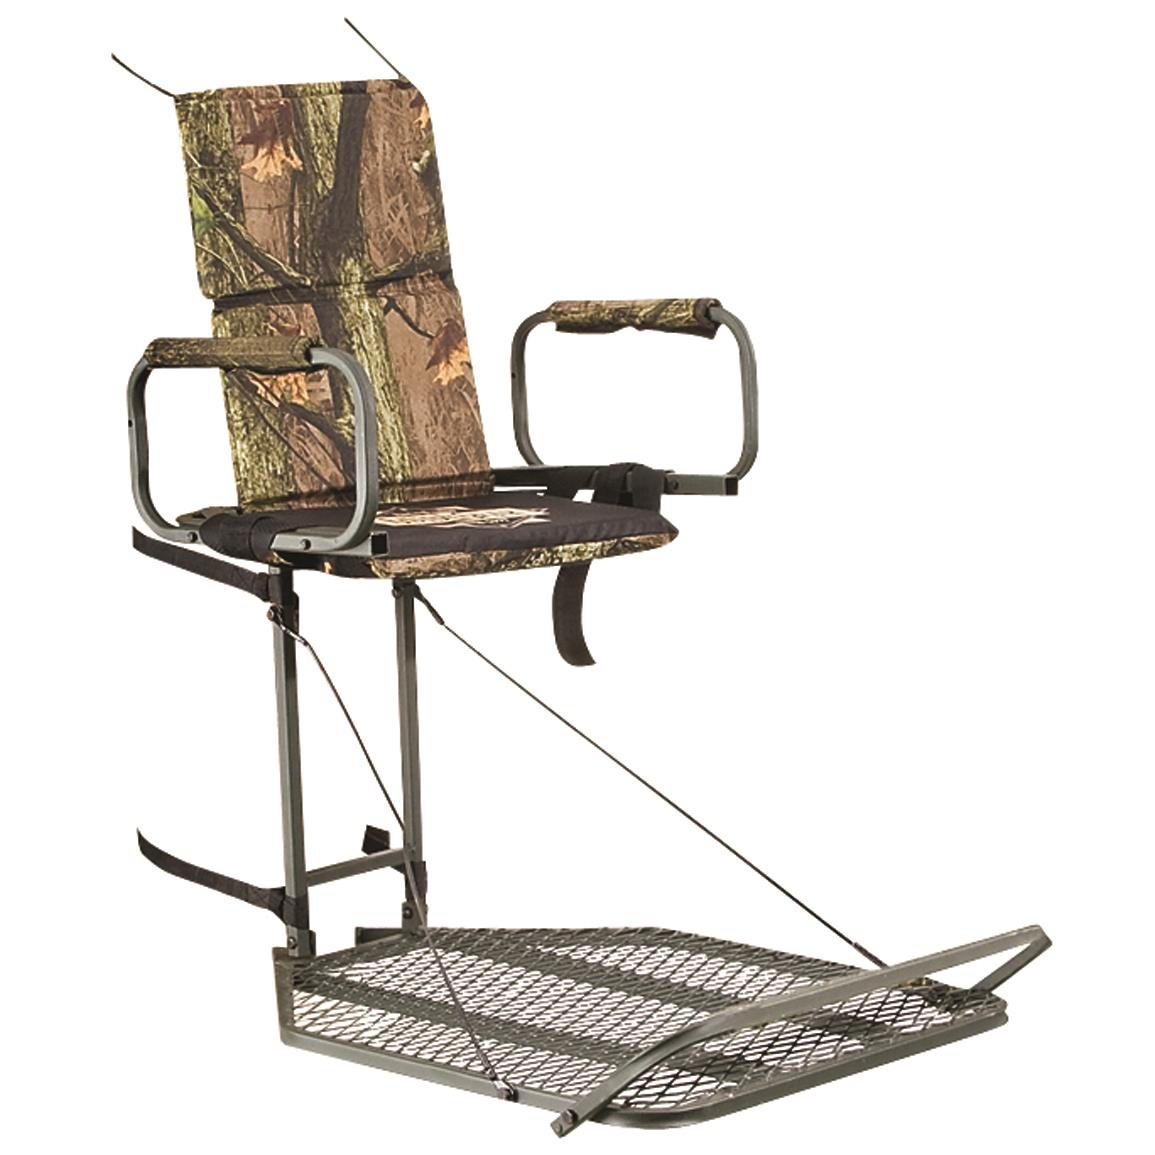 Guide Gear Deluxe Hang On Tree Stand 177427 Hang On Tree Stands At Sportsman S Guide